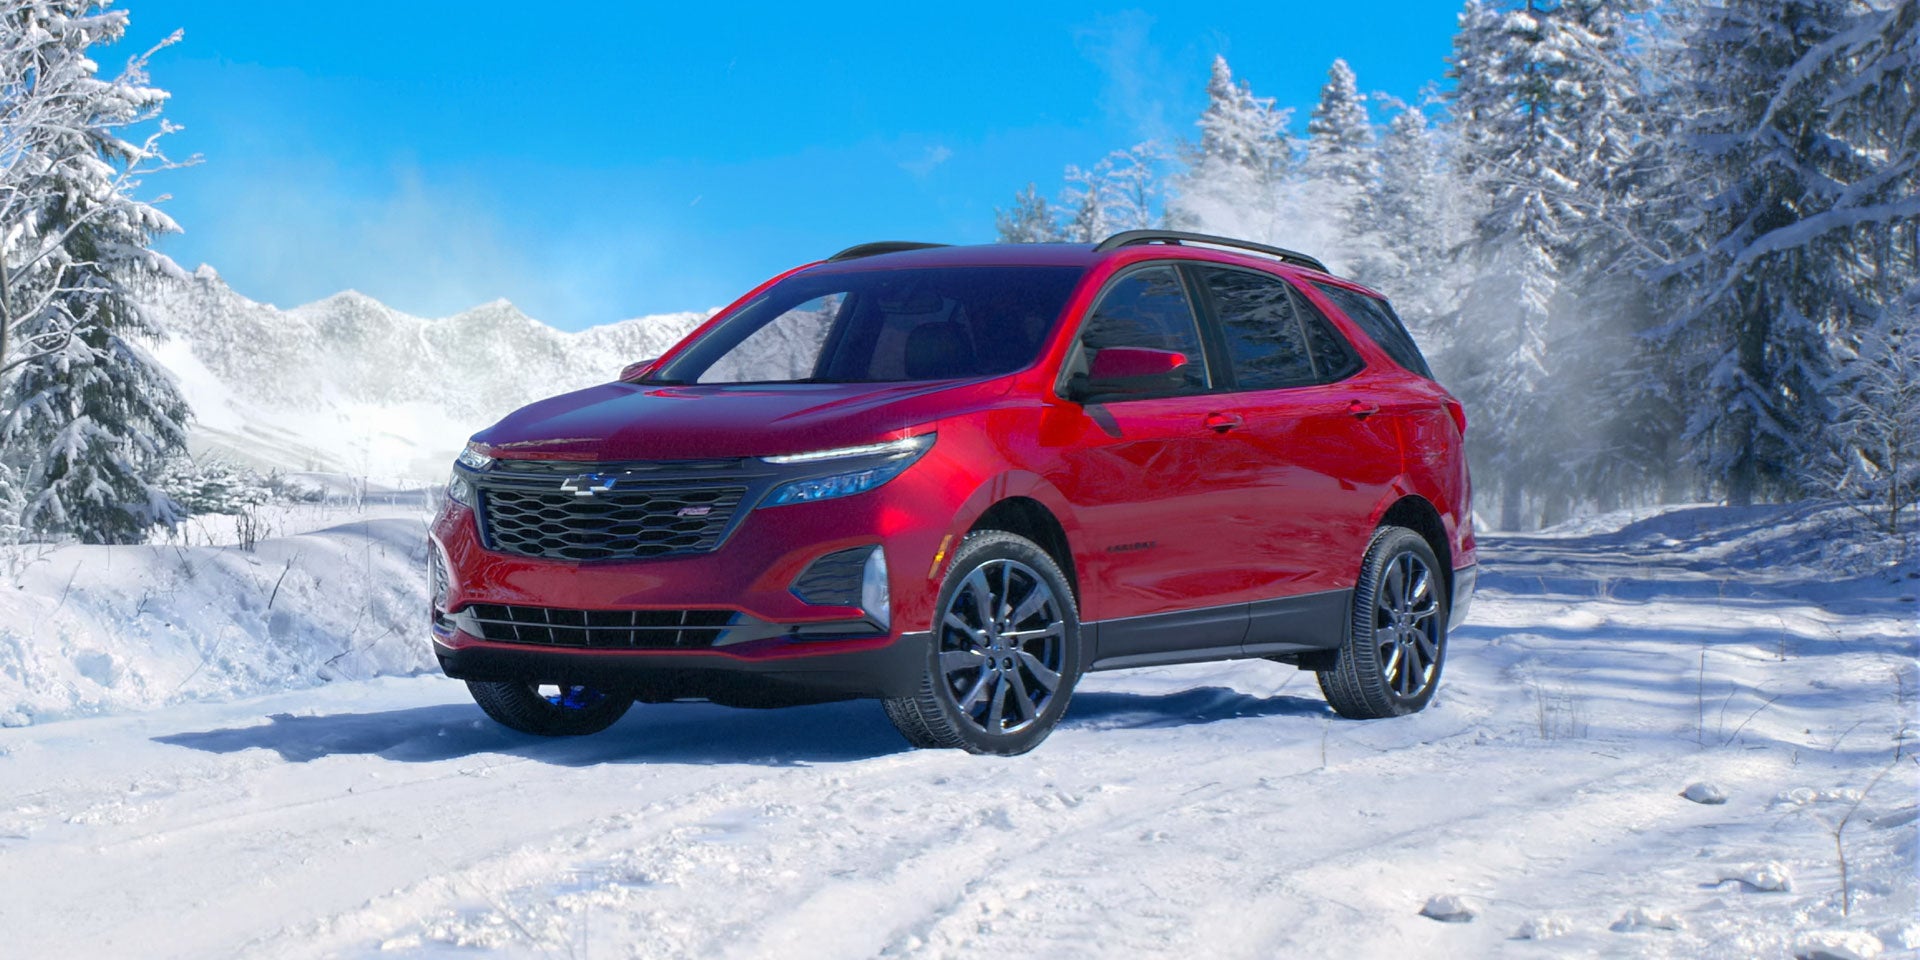 2022 Equinox | Chevrolet of Wooster in Wooster OH